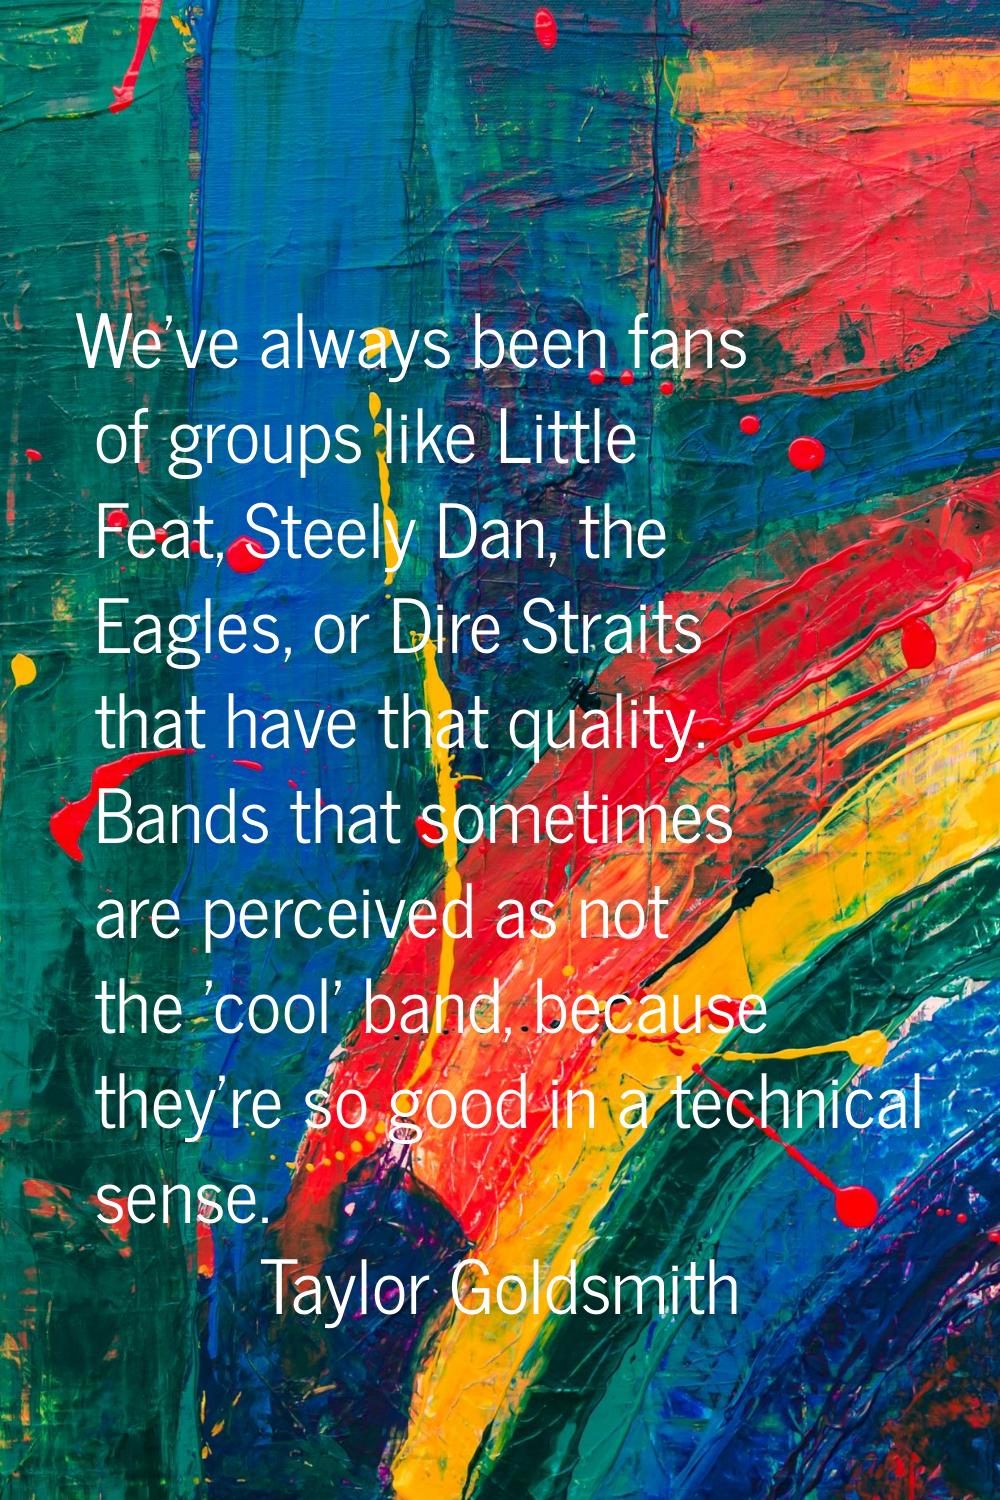 We've always been fans of groups like Little Feat, Steely Dan, the Eagles, or Dire Straits that hav